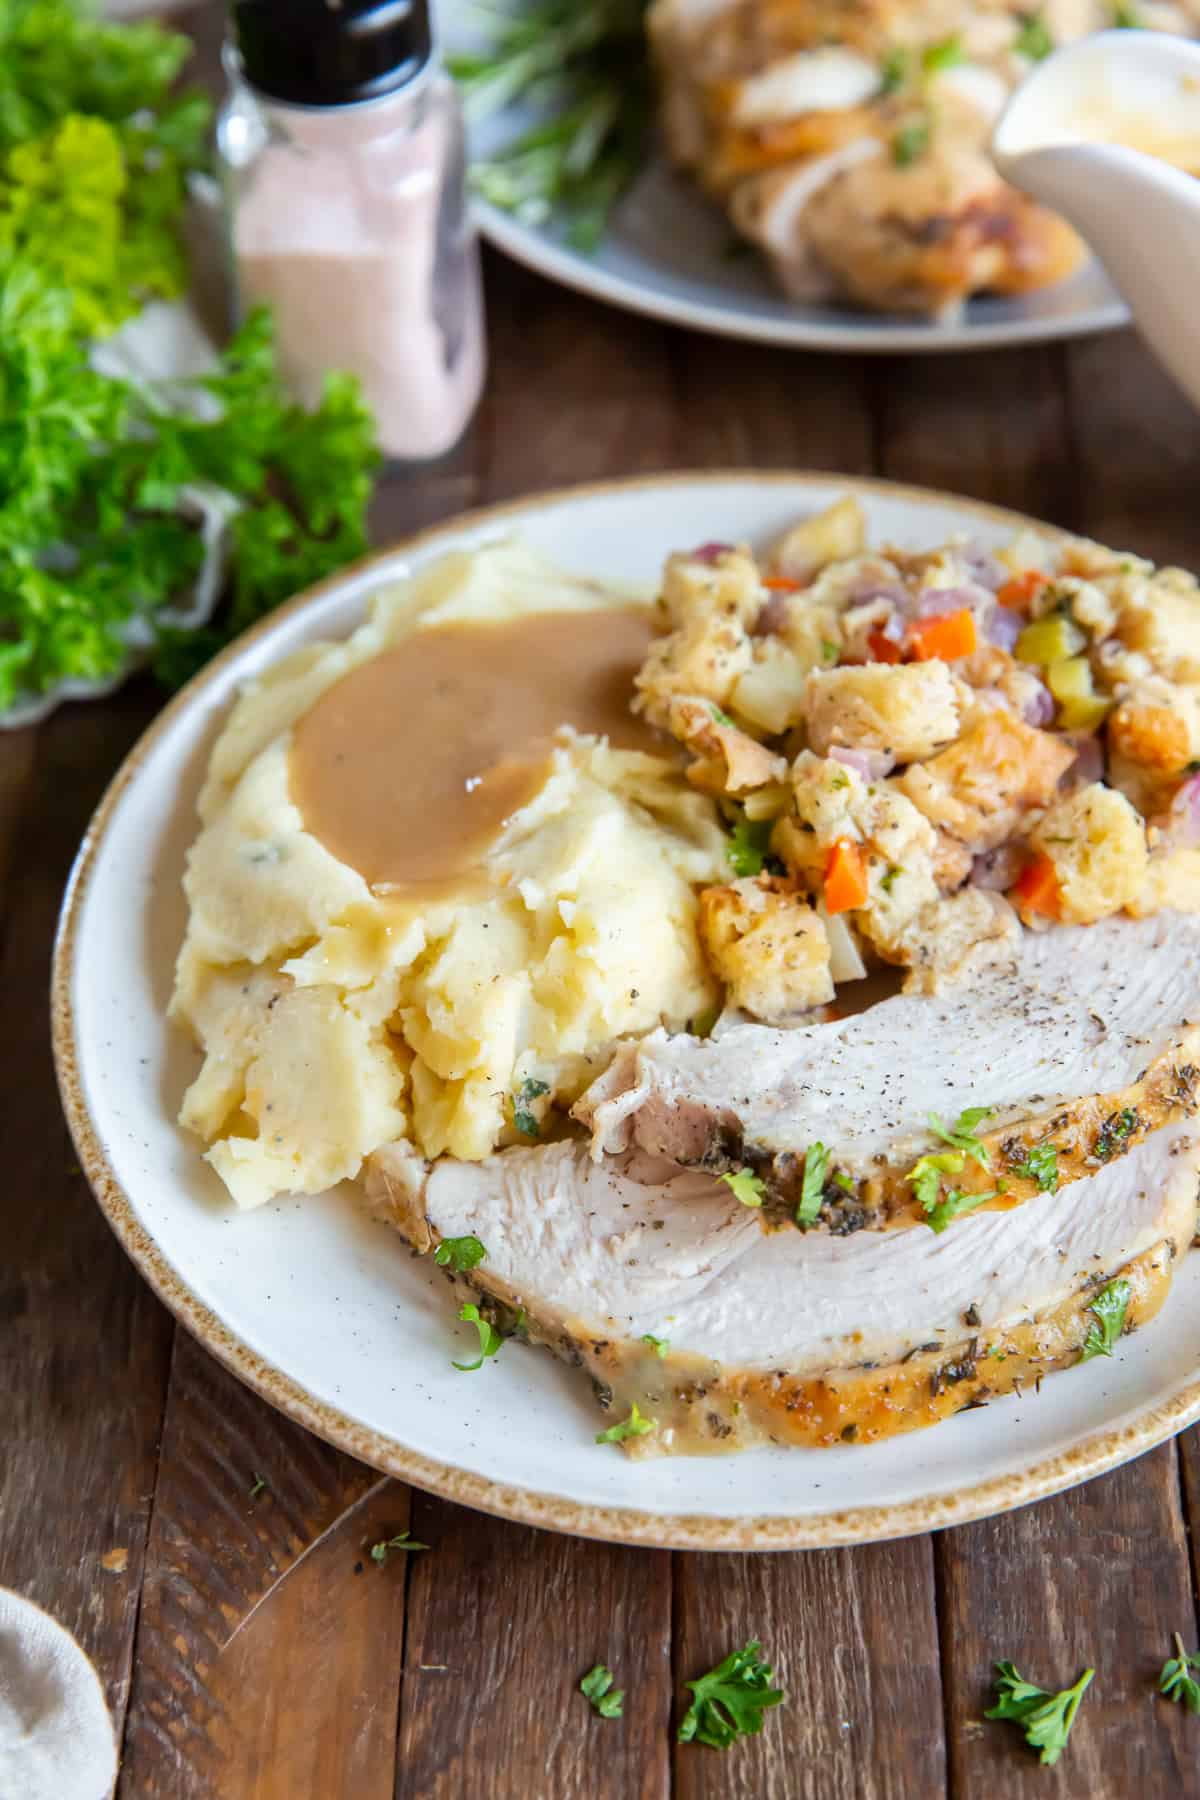 A dinner plate with sliced turkey, mashed potatoes and gravy, and stuffing on a dark board.